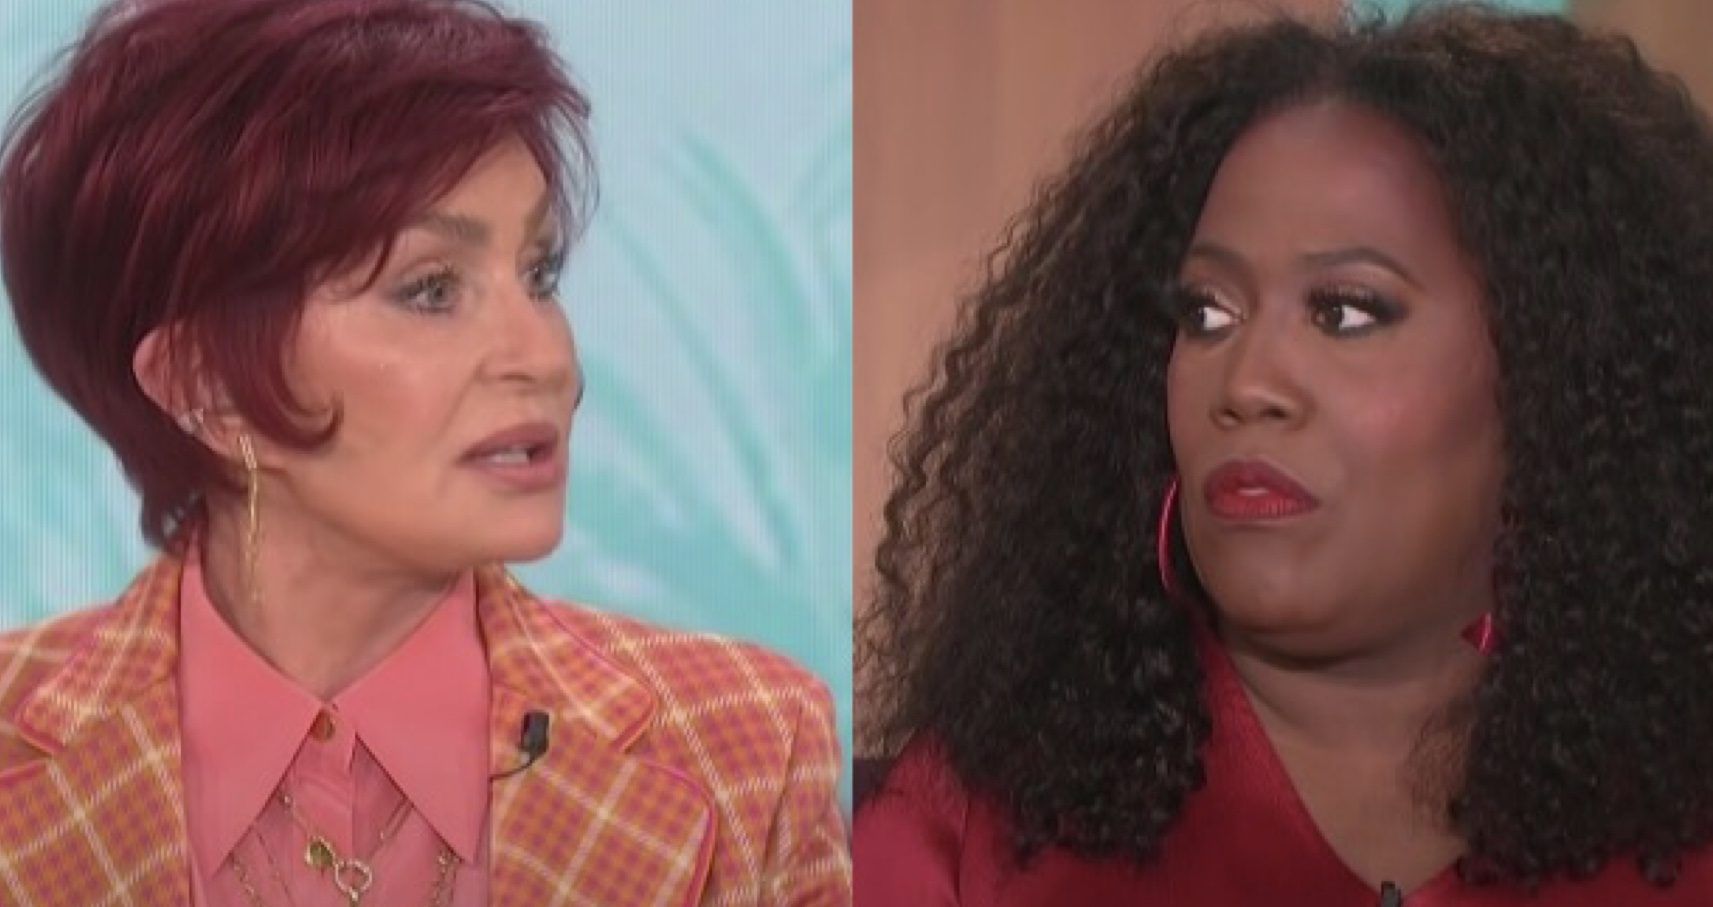 Sharon Osbourne And Sheryl Underwood talking about racism on The Talk